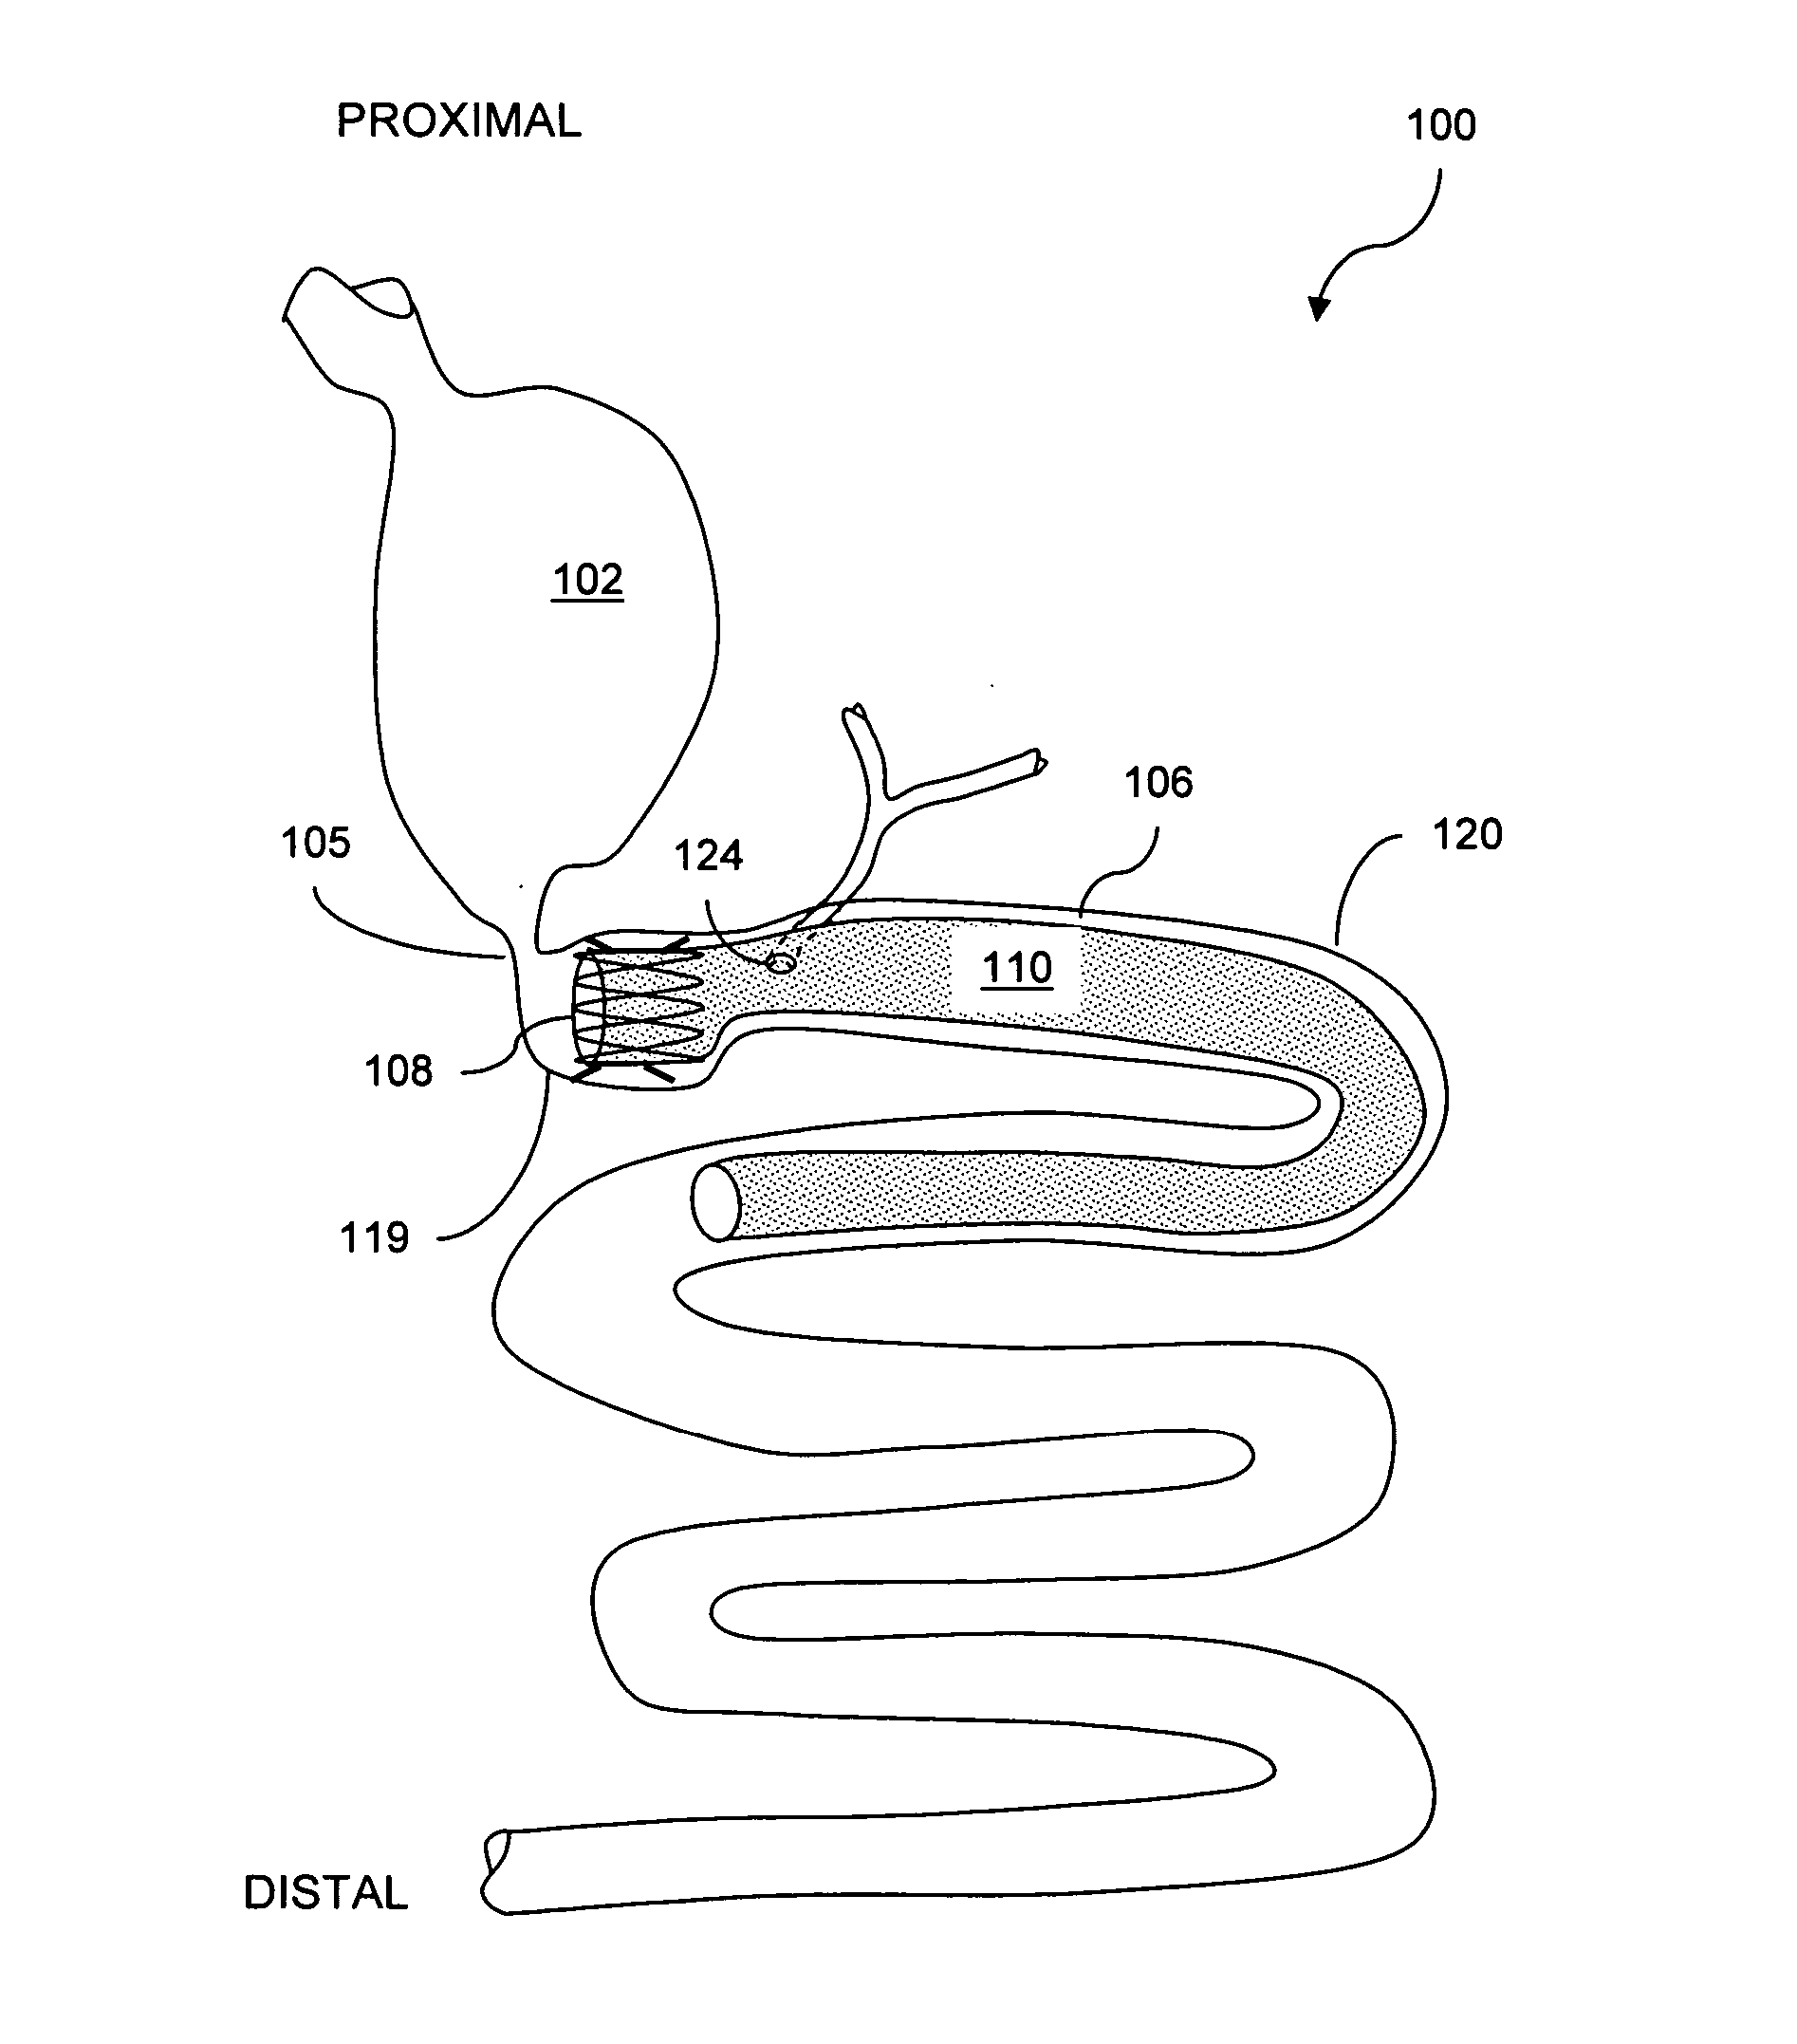 Methods and apparatus for anchoring within the gastrointestinal tract